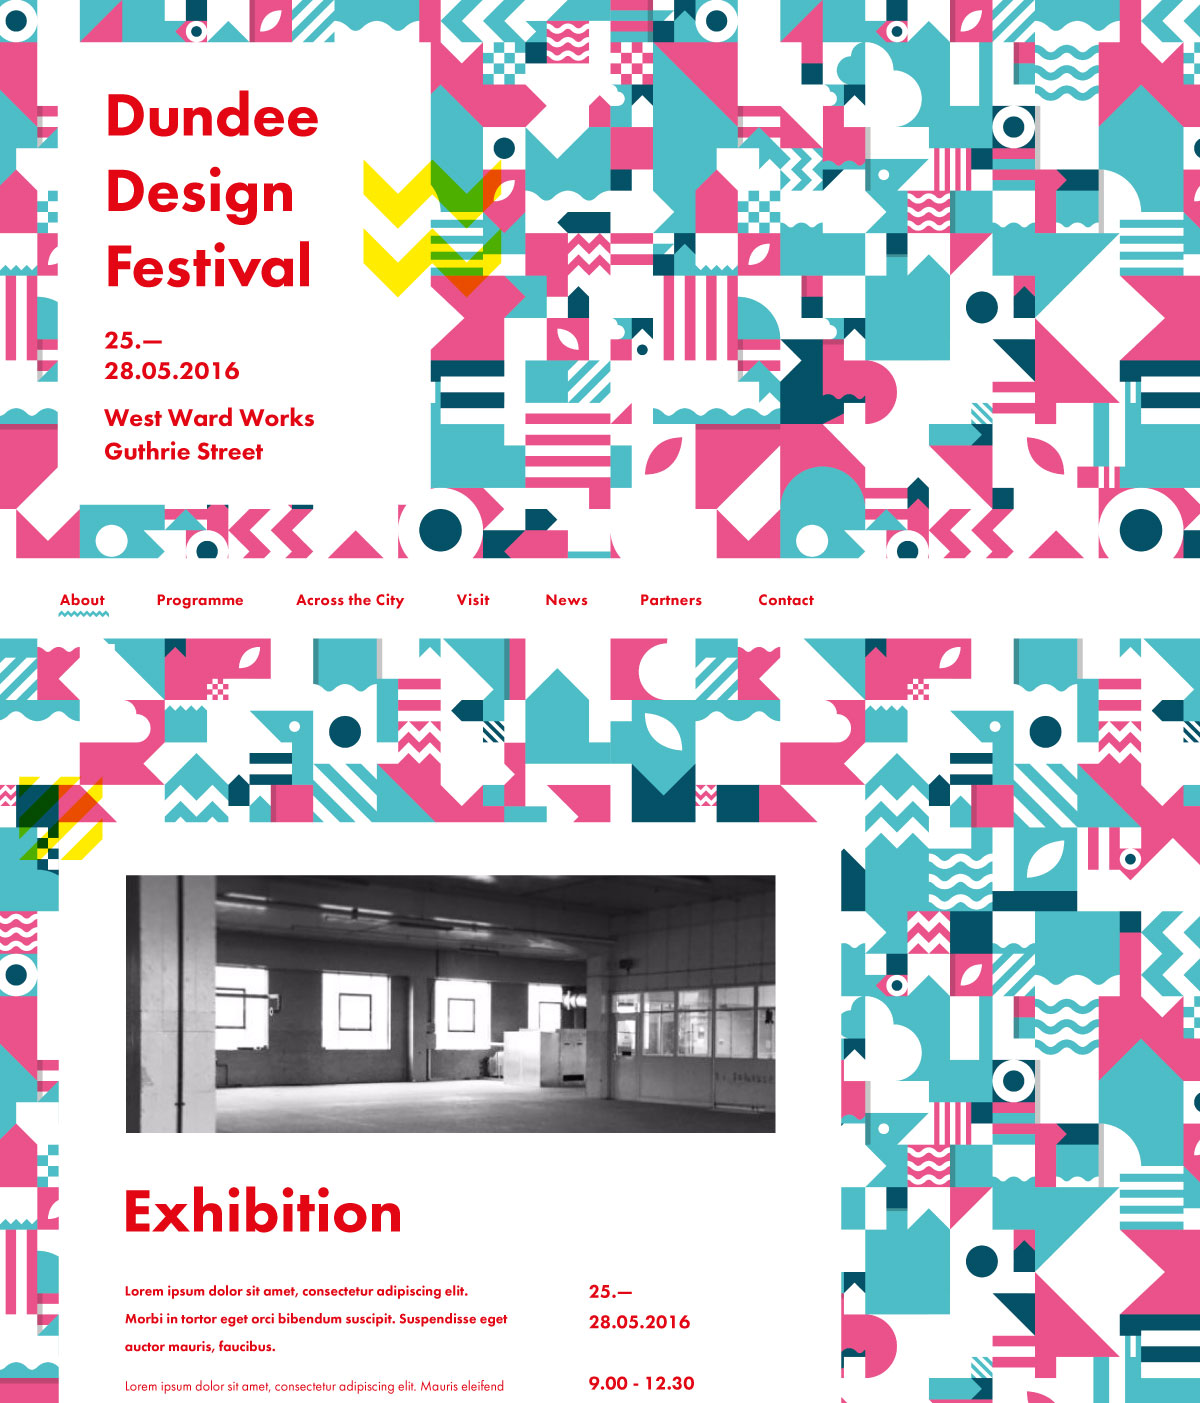 Dundee Design Festival 2016 website content sits ontop of a bold pink and blue patterned background.